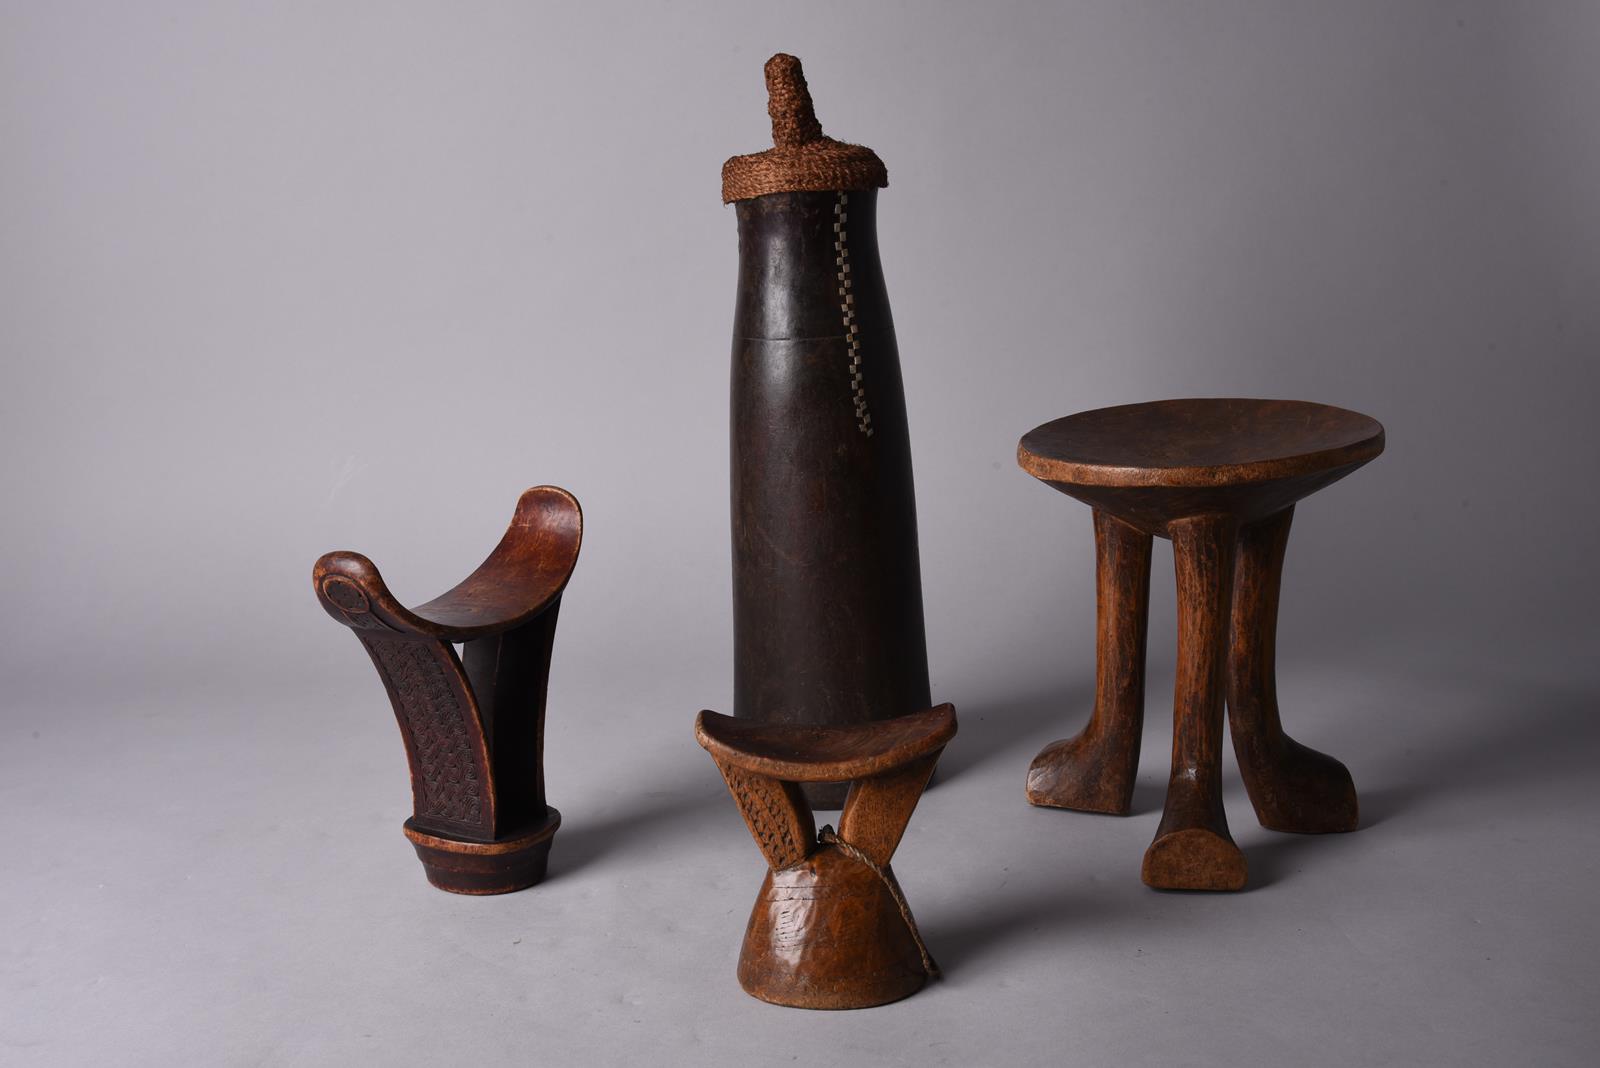 A Pokot stool Kenya with a dished seat, 22.5cm high, a Tutsi milk container, with aluminium and horn - Image 2 of 2